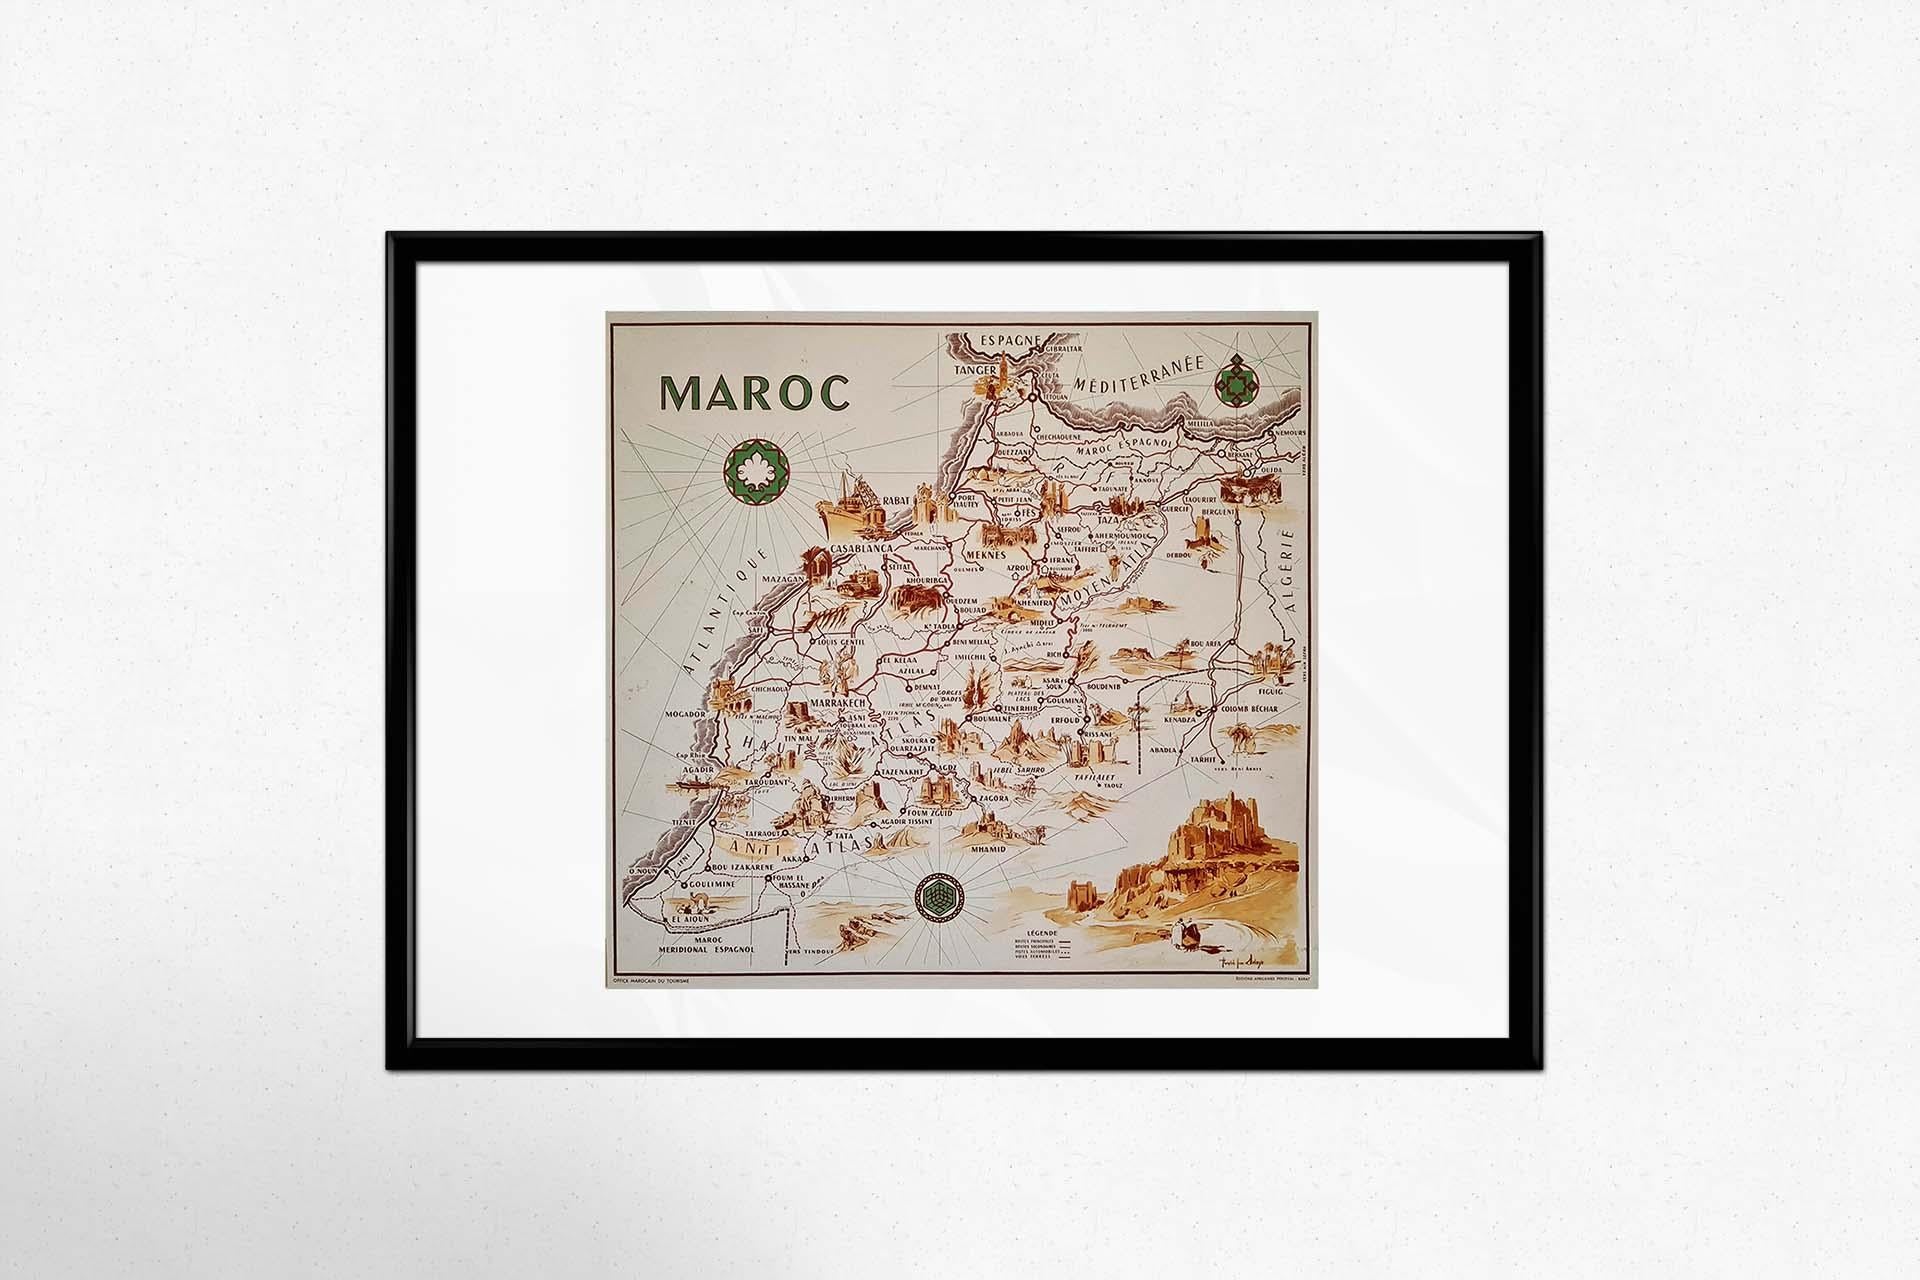 Beautiful illustrated map of Morocco created in 1950 by Delaye. Main roads, car tracks, railroads are represented. This illustrated map is printed by Perceval in Rabat.

Map - North Africa